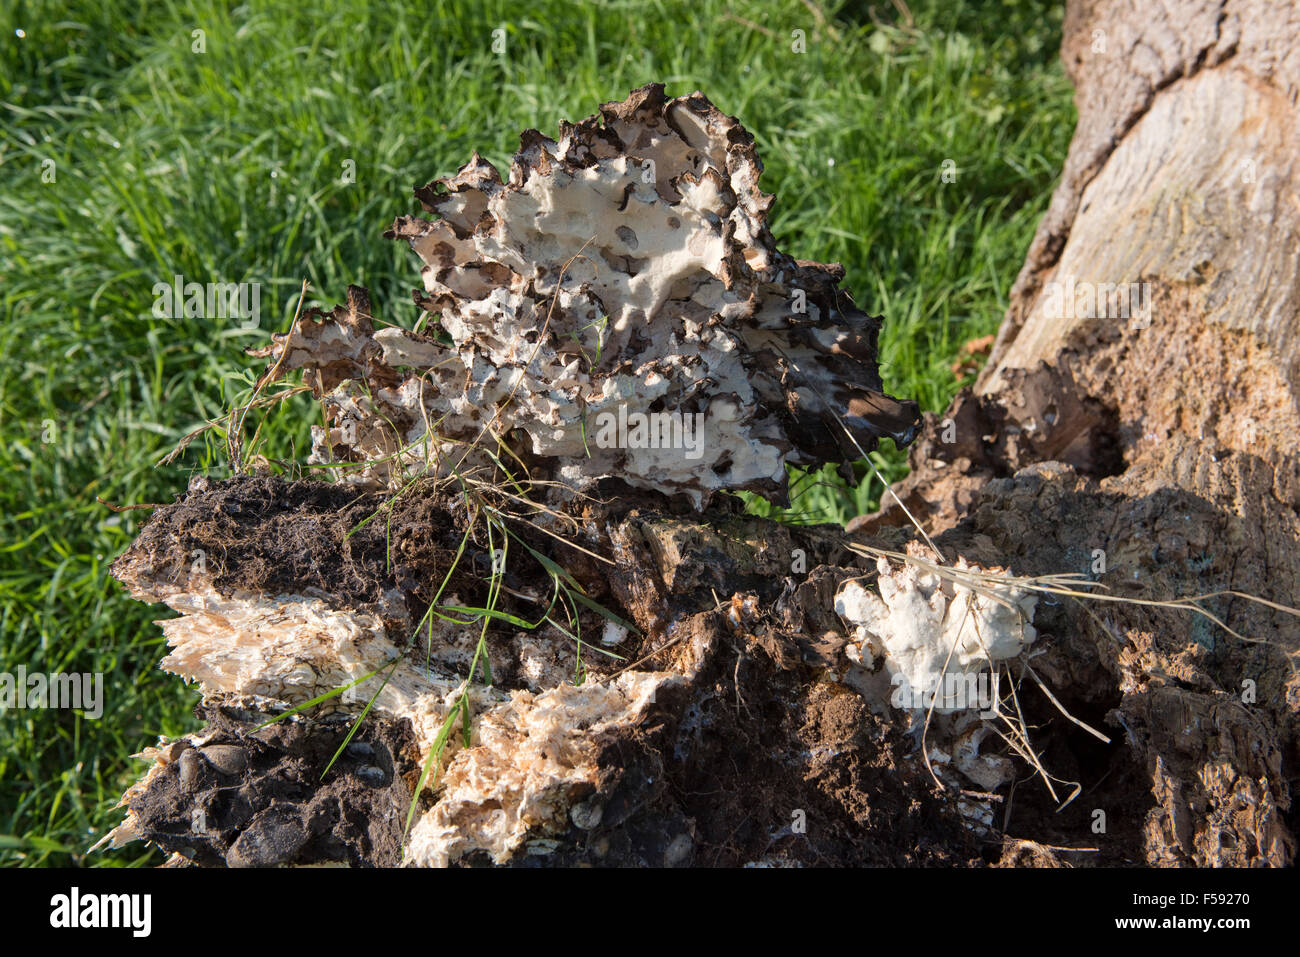 Fallen oak tree, Quercus robur, with sparse foliage rotten and killed by several fungal pathogens, Berkshire, September Stock Photo